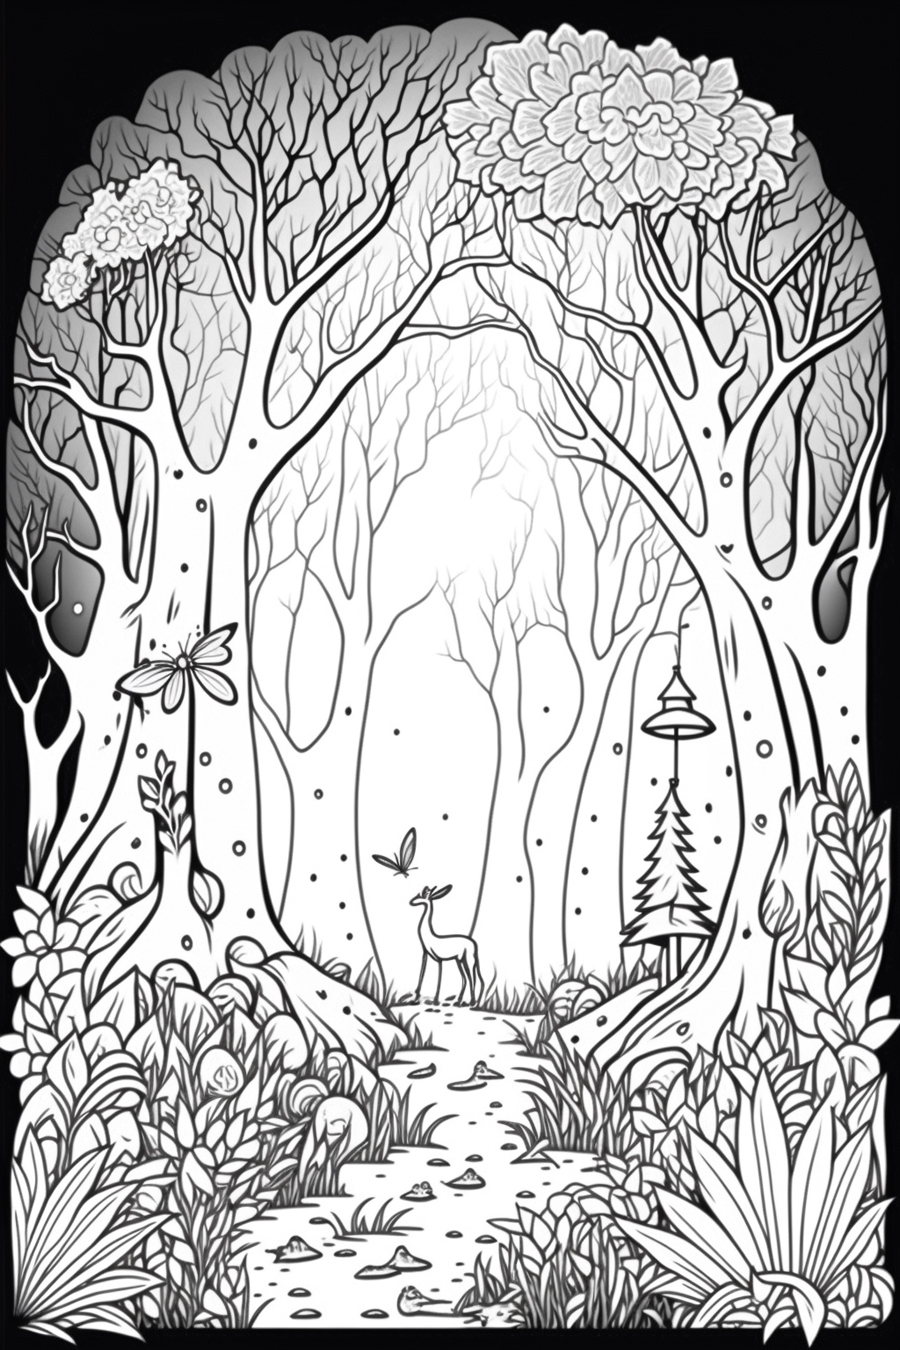 A black and white drawing of a deer in the forest.